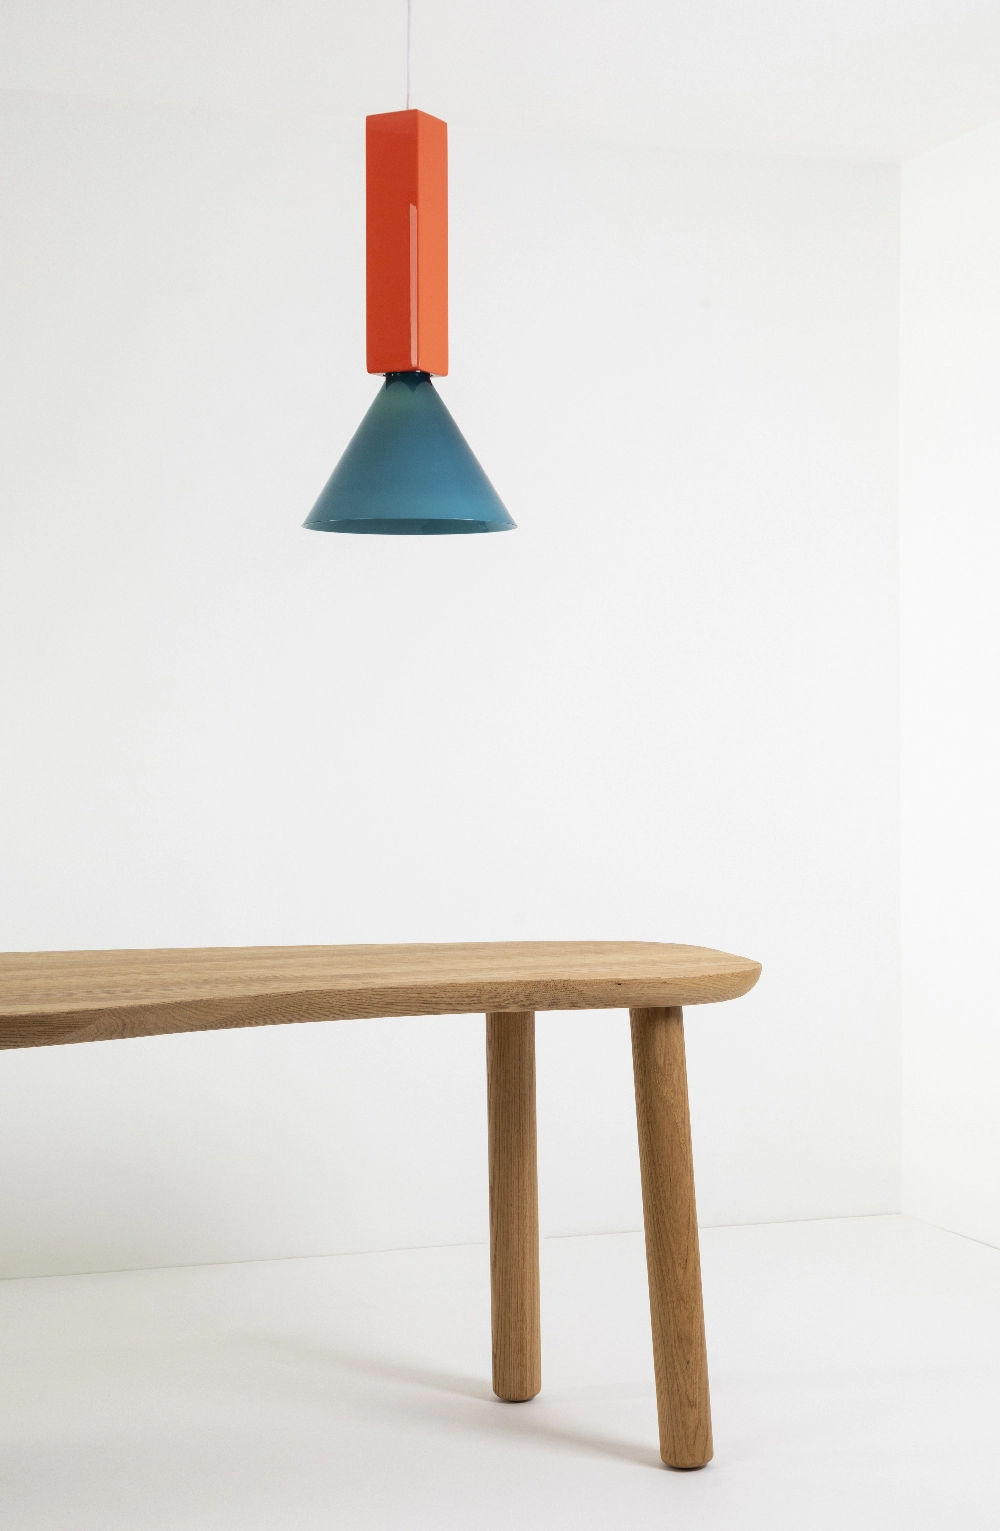 Signal C1 POLYCHROMATIC - Edward and Jay Barber and Osgerby - Pendant light - Galerie kreo